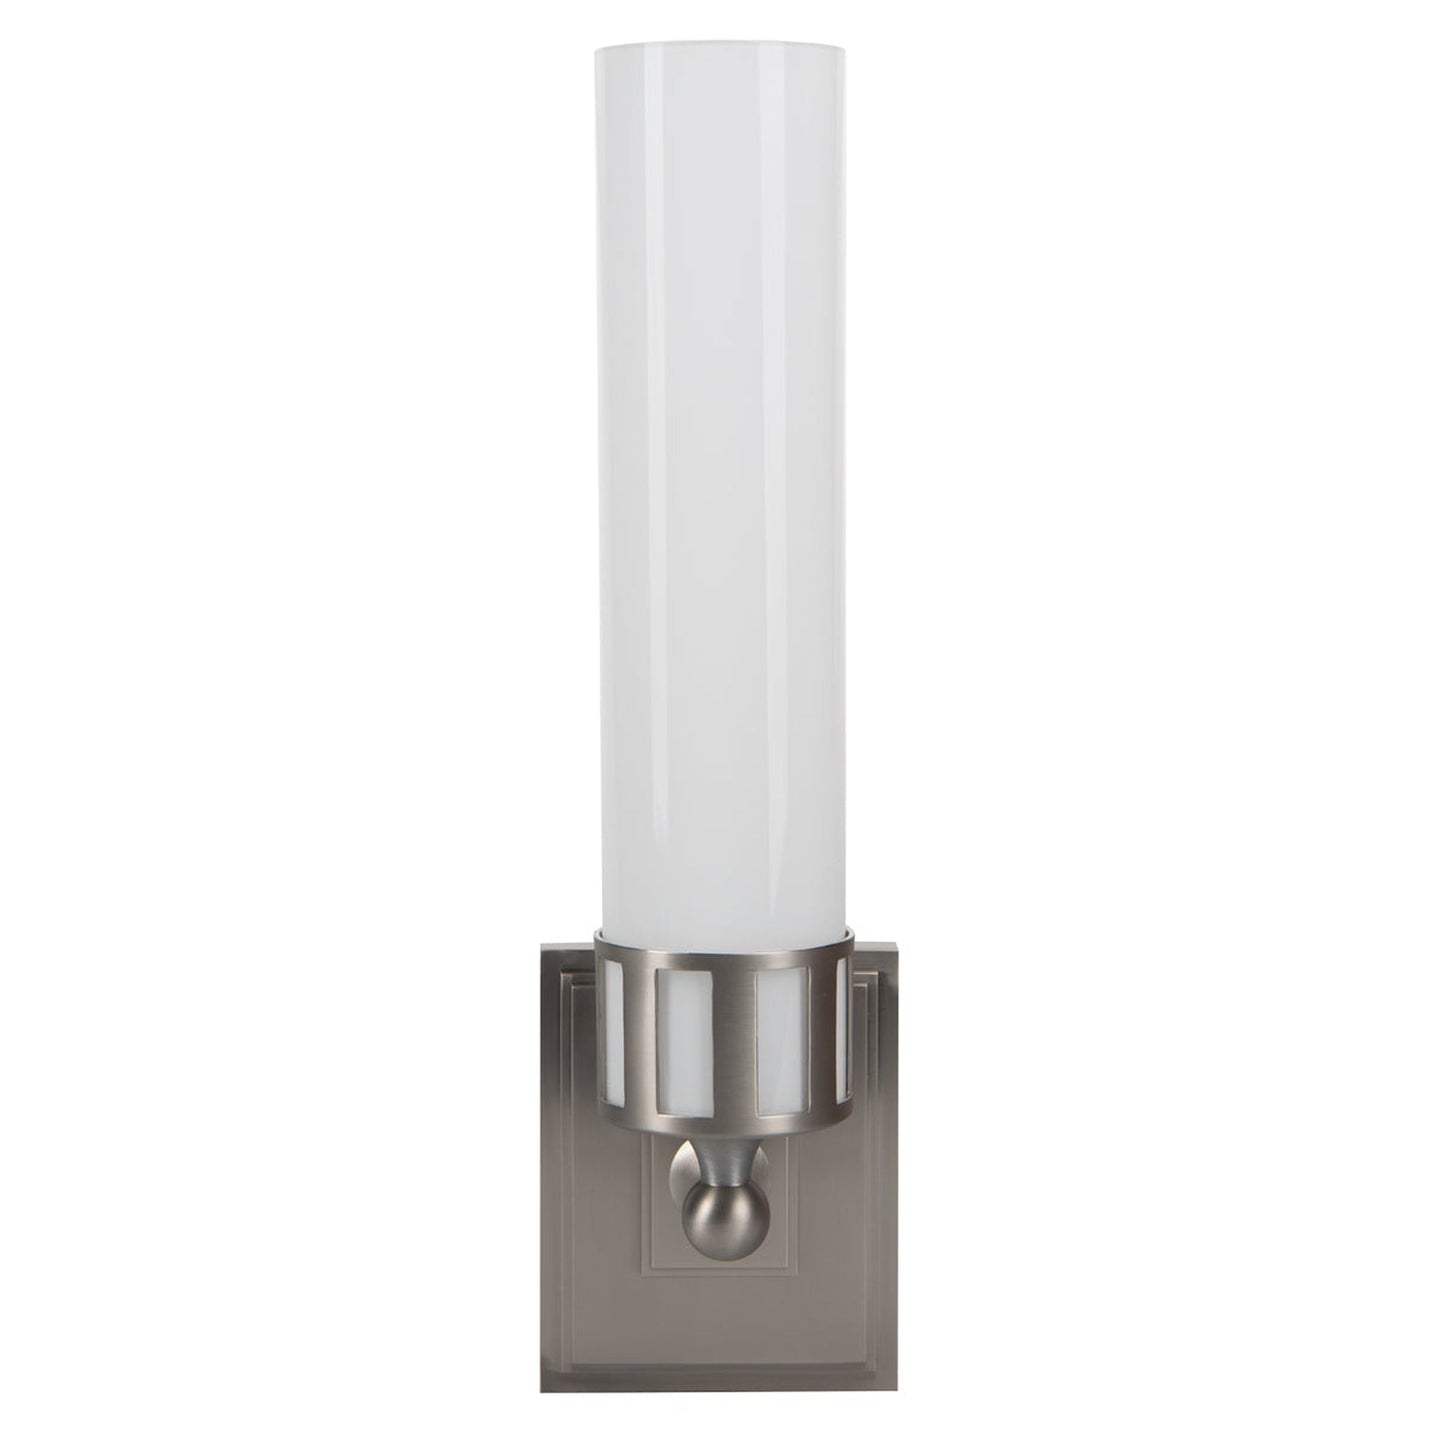 Norwell Lighting Astor 15" x 4" 1-Light Brushed Nickel Vanity Wall Sconce With Shiny Opal Glass Diffuser